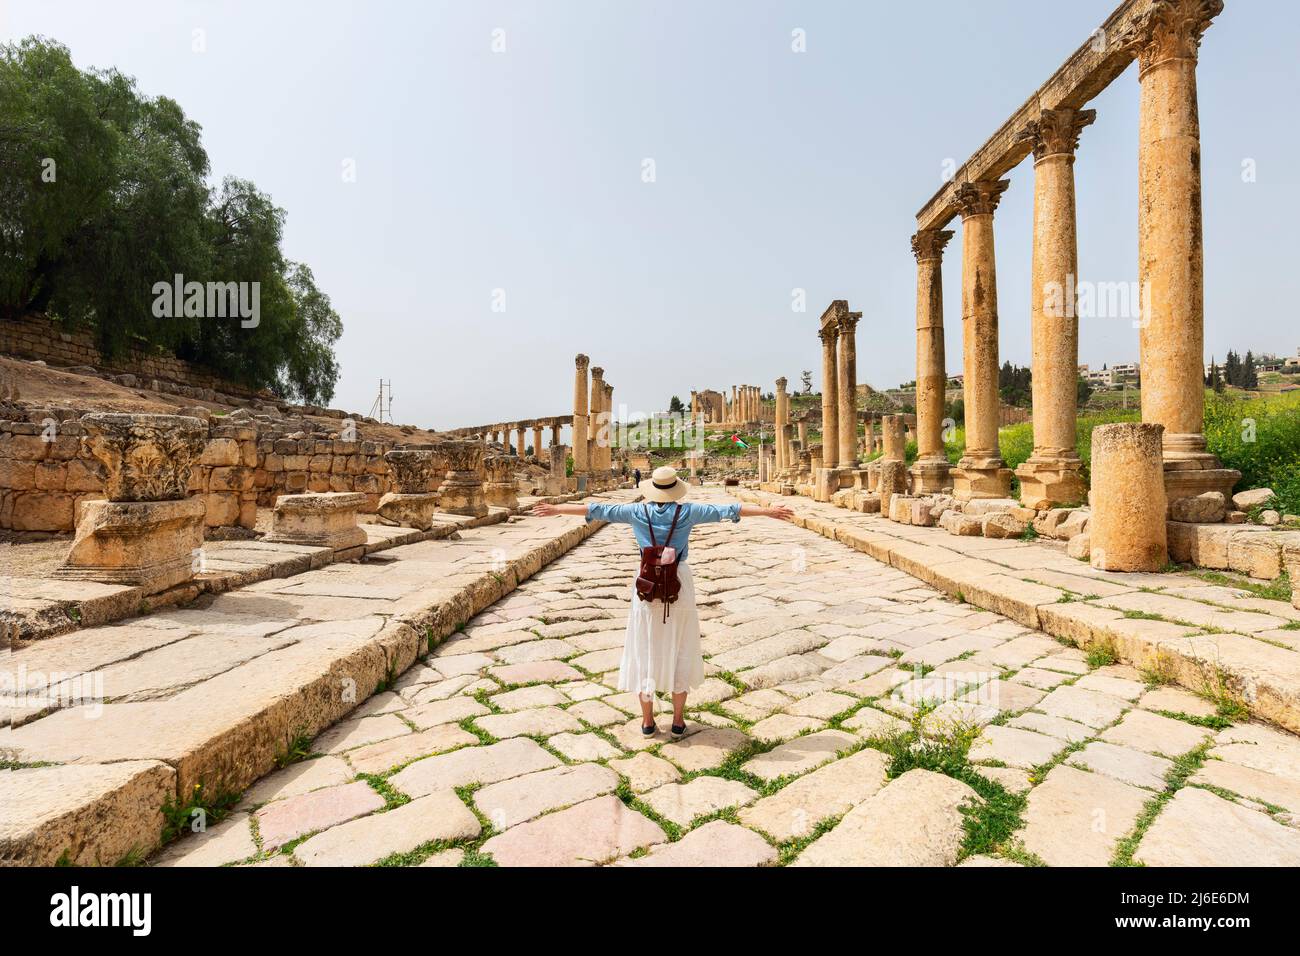 young woman tourist in color dress and hat leading man to South gate of the Ancient Roman city of Gerasa, modern Jerash, Jordan. Traveling together. Stock Photo